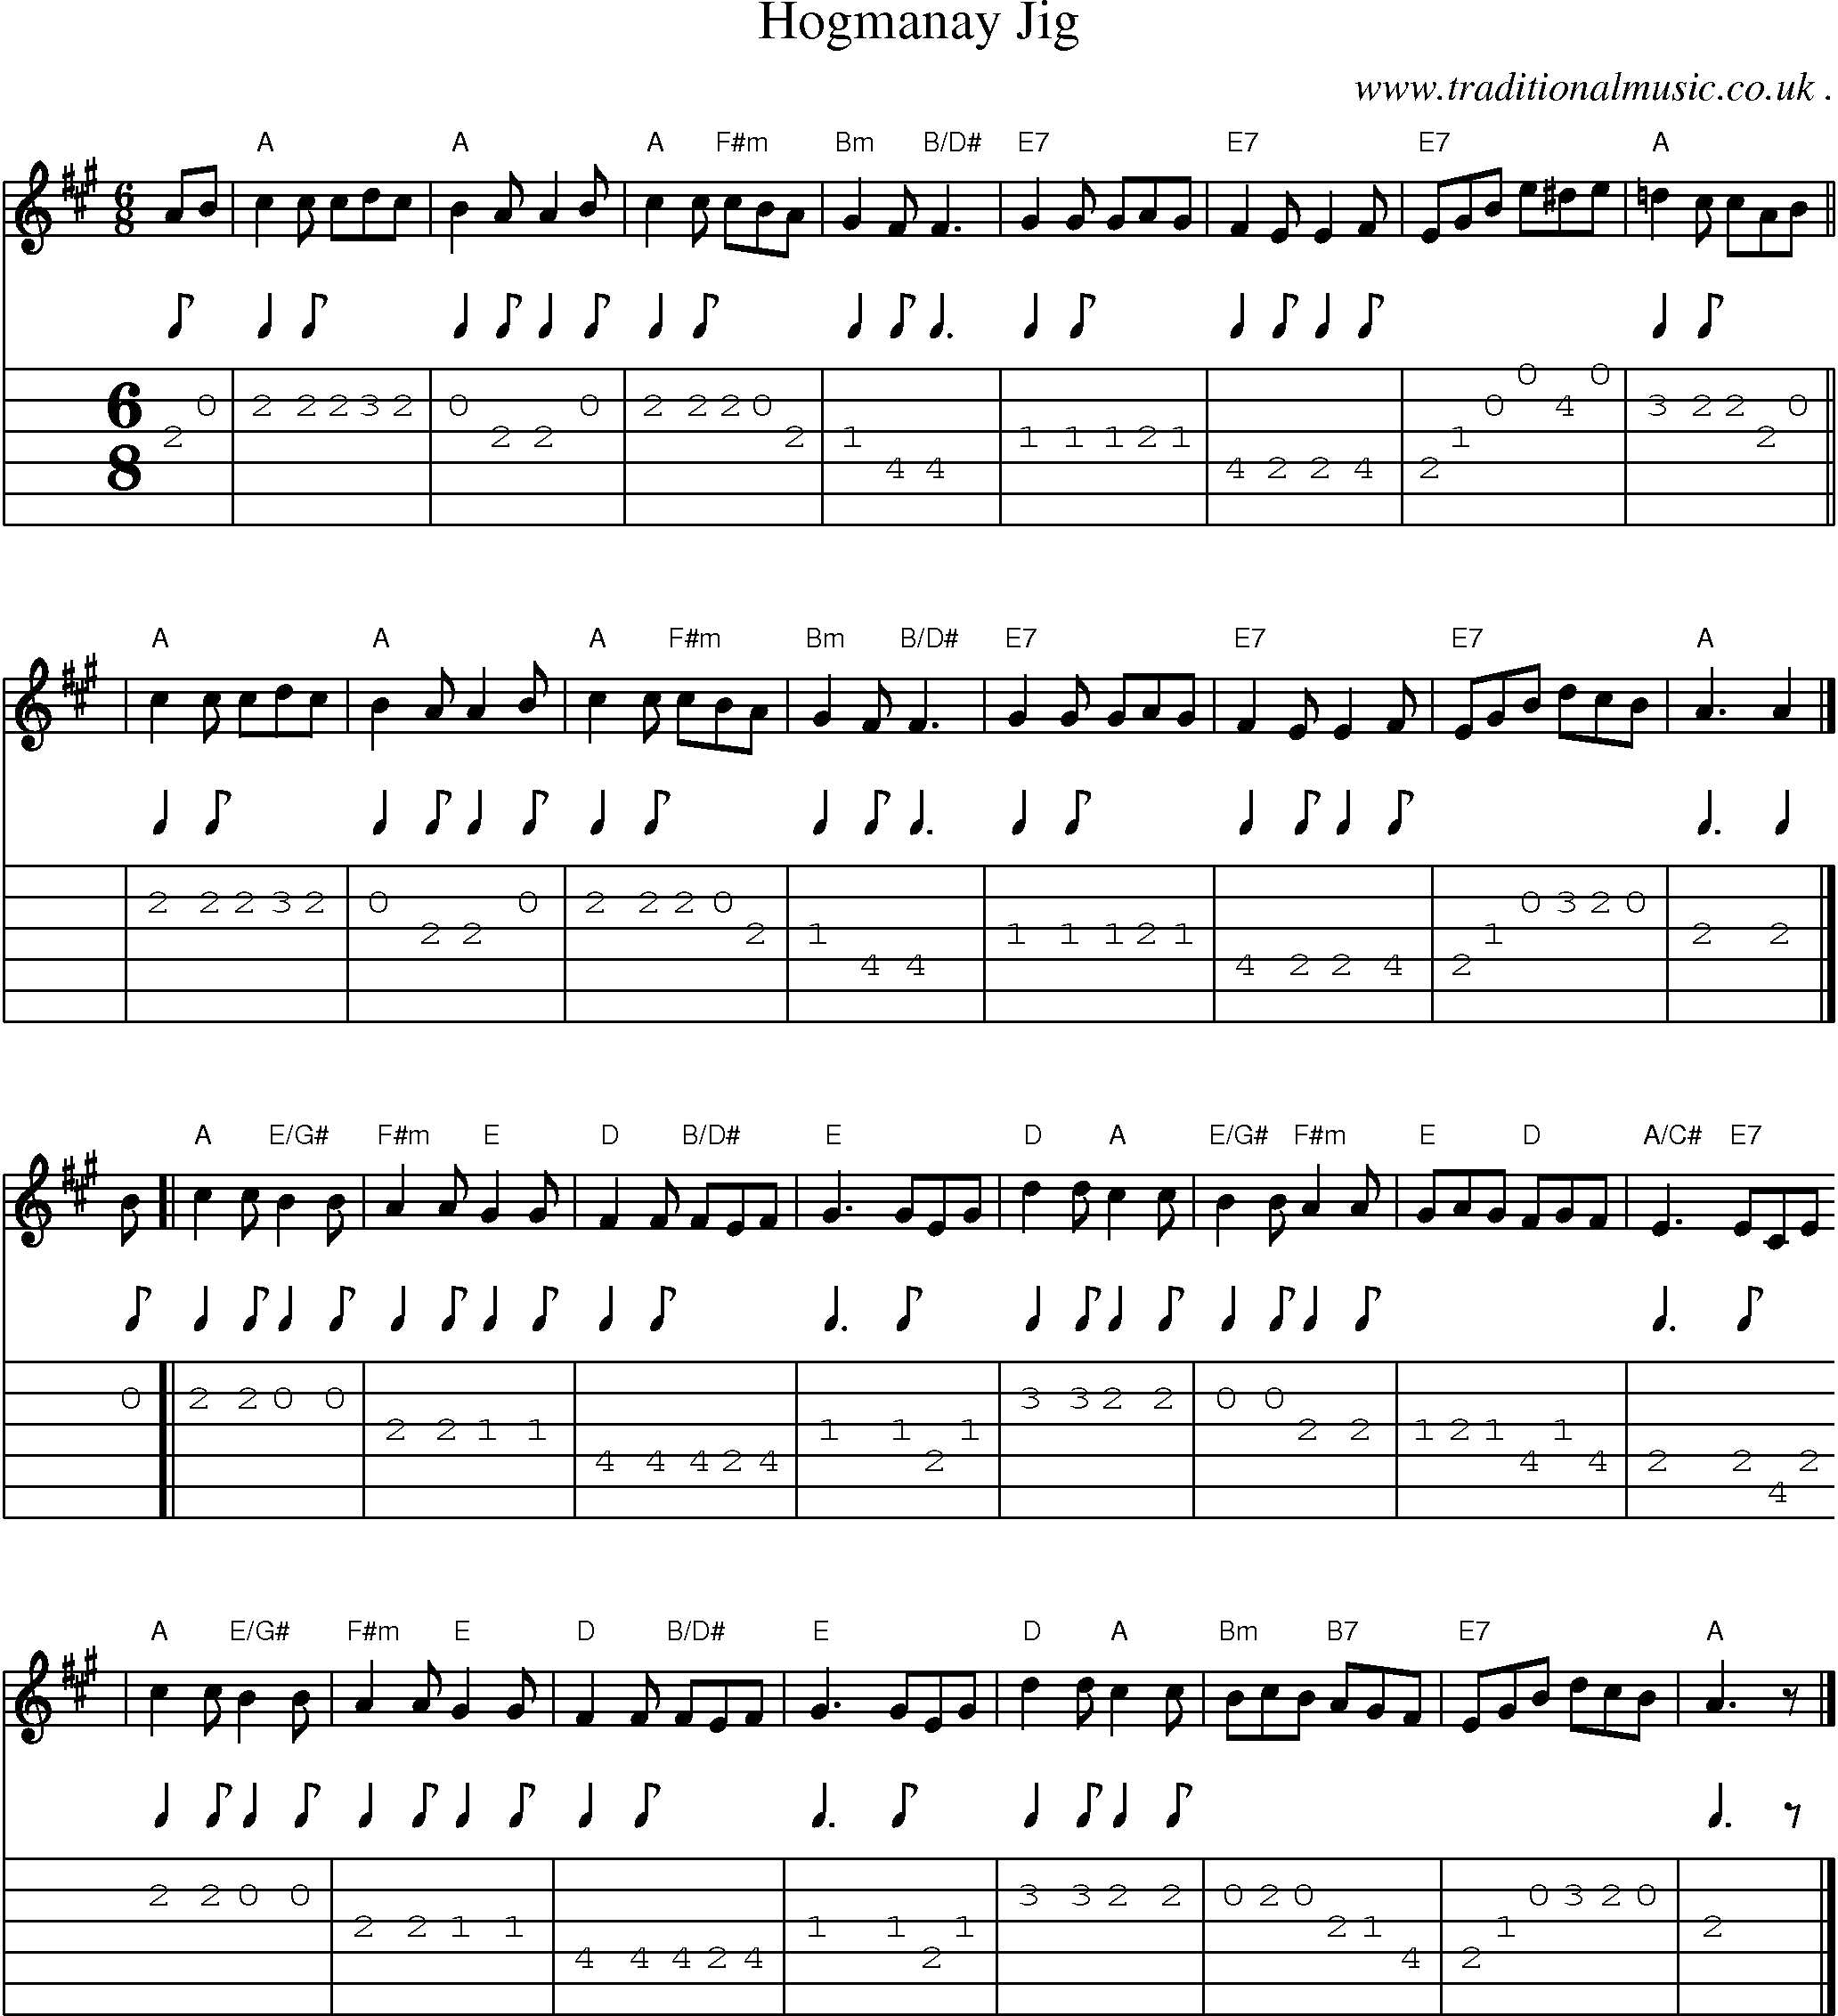 Sheet-music  score, Chords and Guitar Tabs for Hogmanay Jig